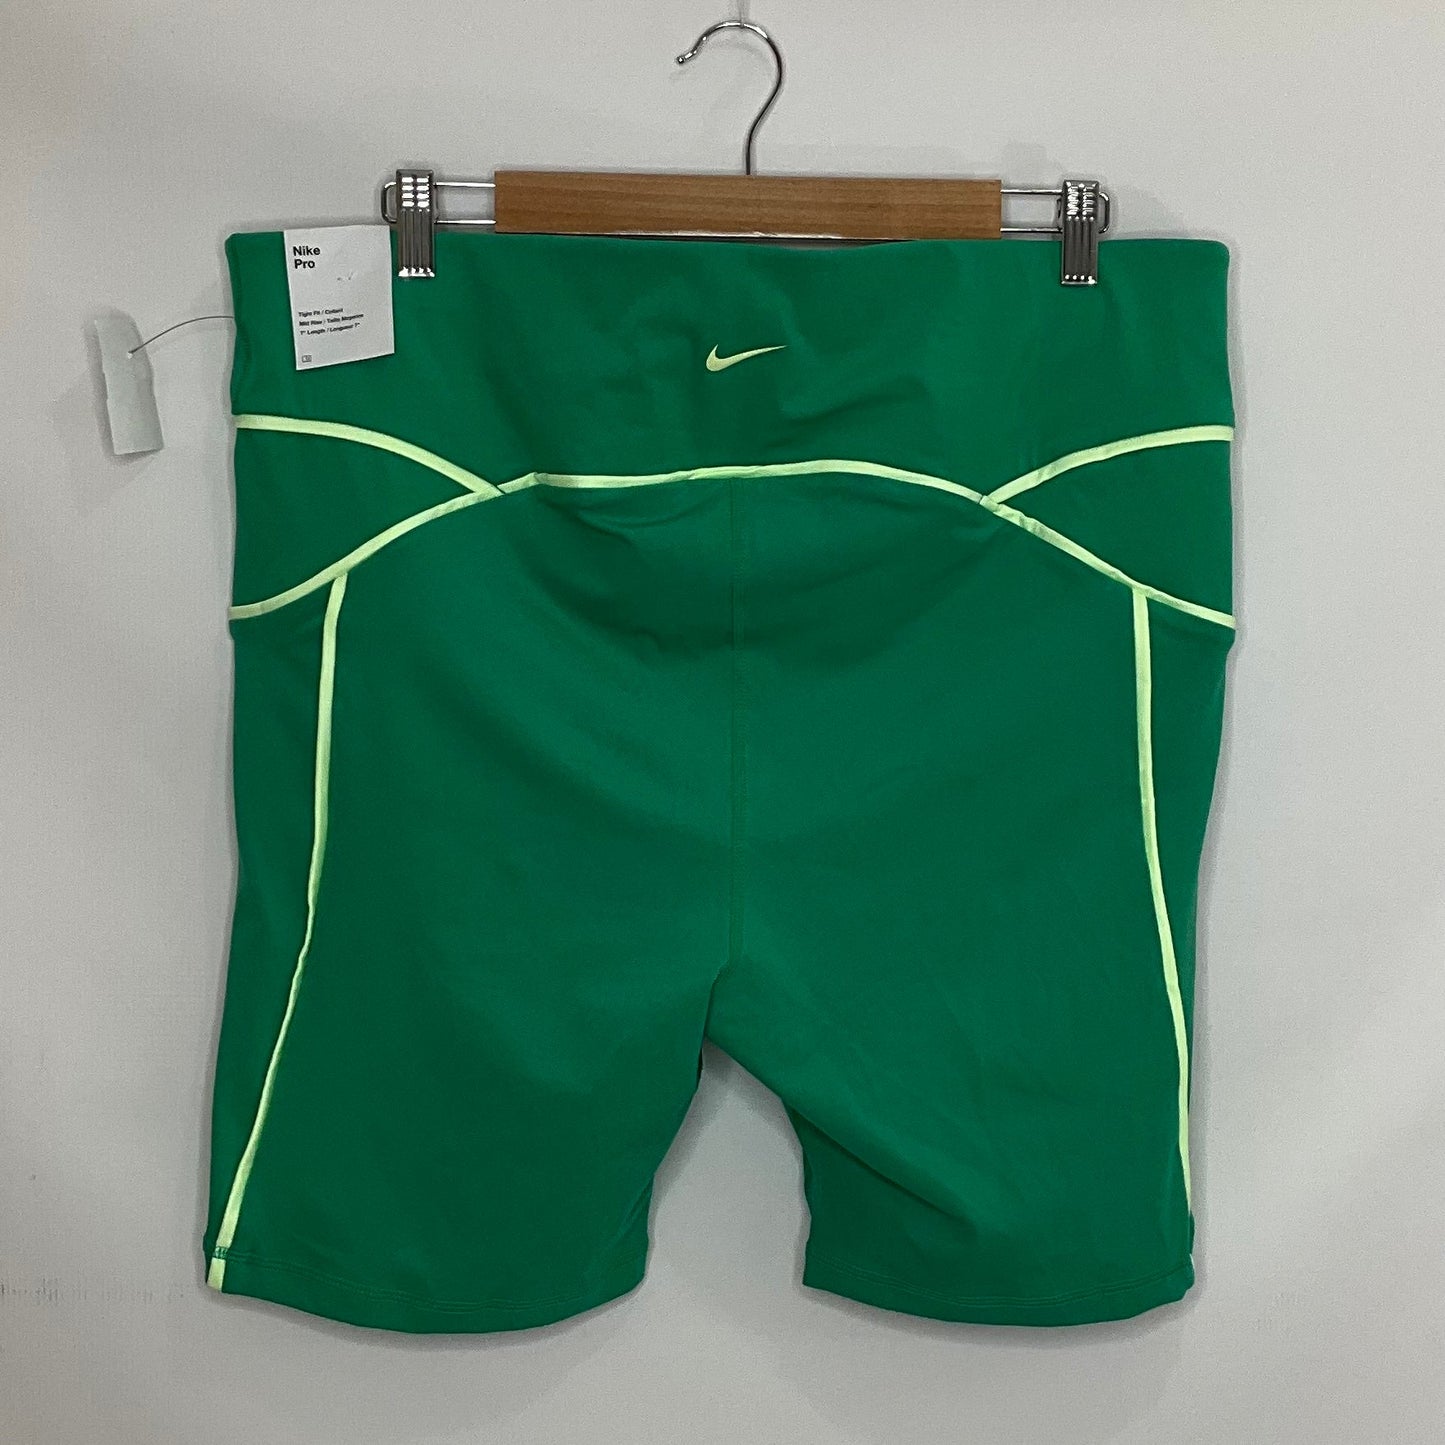 Green Athletic Shorts Nike Apparel, Size 2x